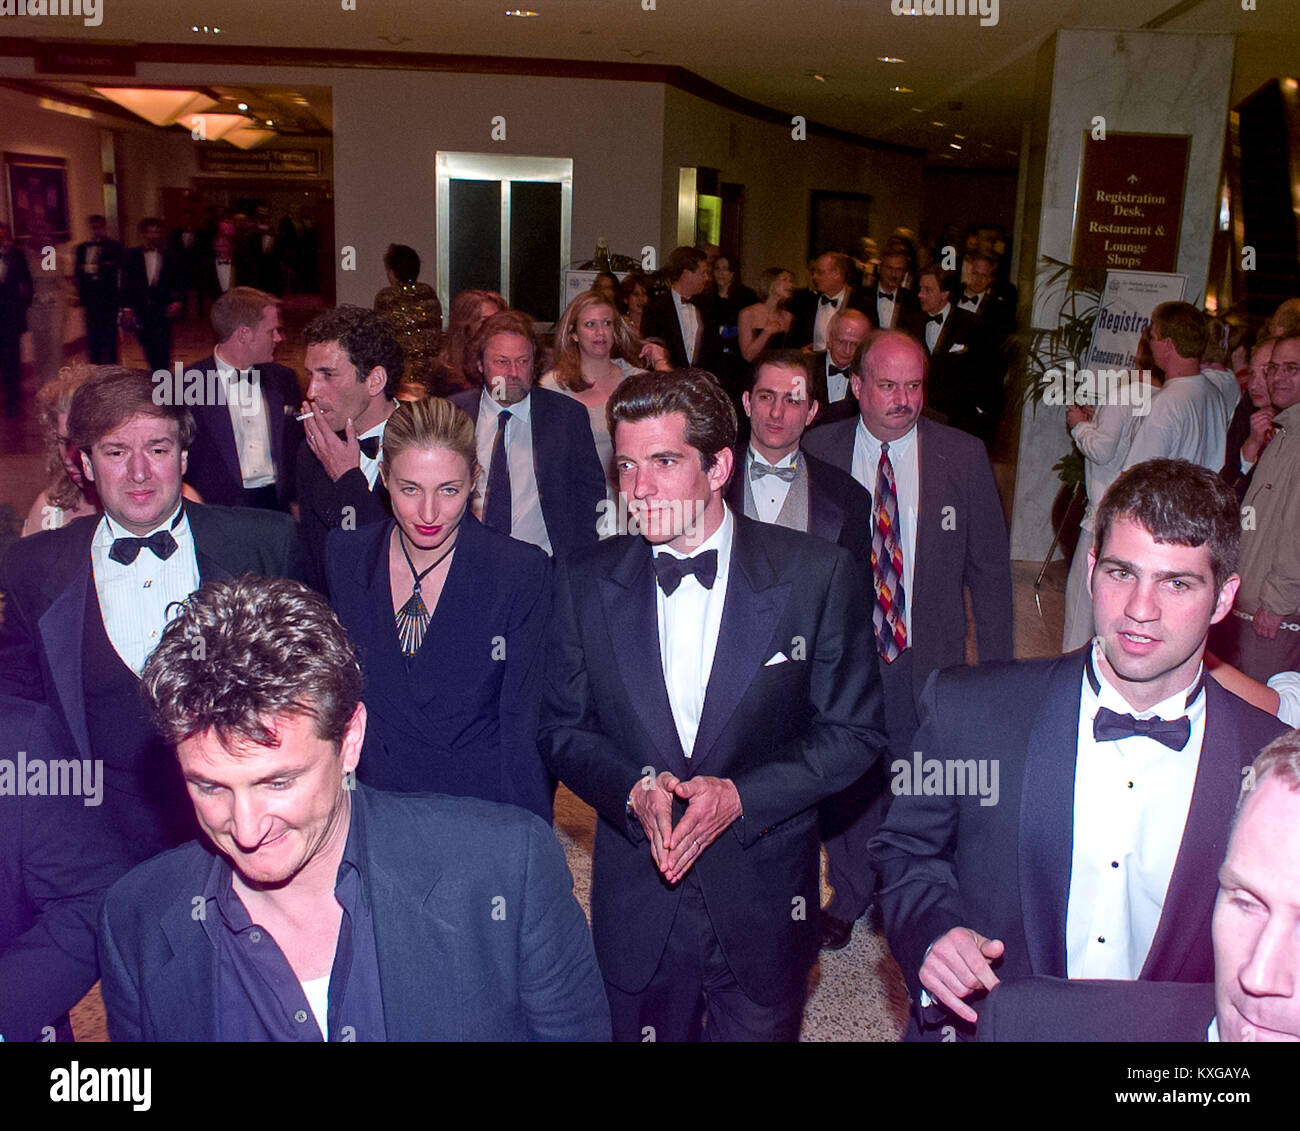 Actor Sean Penn, lower left, and John F. Kennedy, Jr. and his wife, Carolyn Bessette Kennedy depart the 1999 White House Correspondents Association Dinner at the Washington Hilton Hotel in Washington, DC on May 1, 1999. Credit: Ron Sachs/CNP - NO WIRE SERVICE · Photo: Ron Sachs/Consolidated News Photos/Ron Sachs - CNP Stock Photo